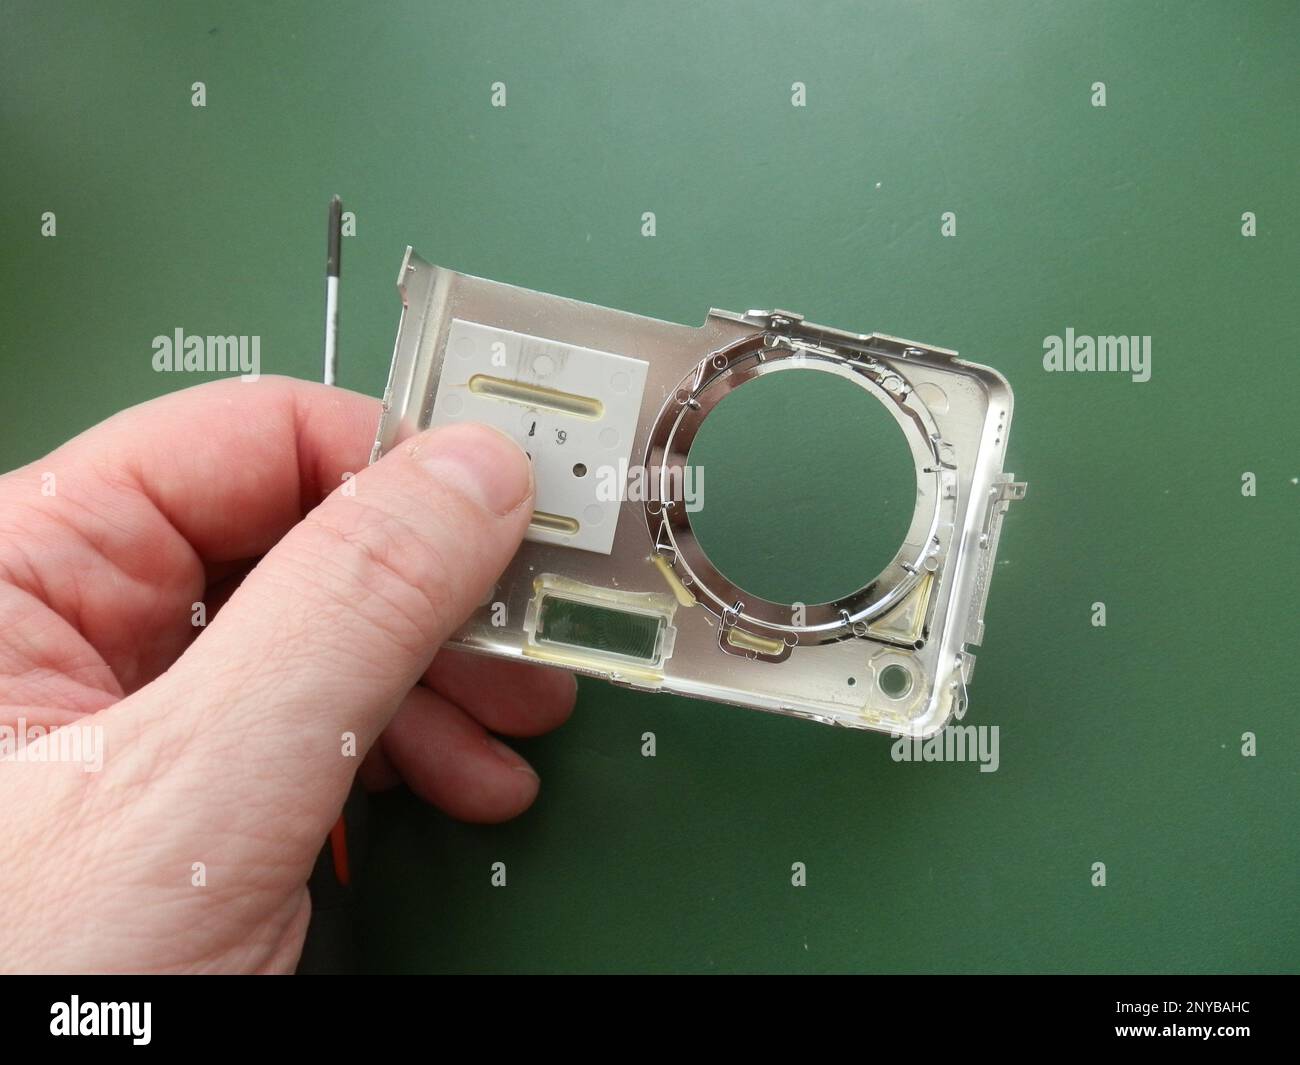 Repair and disassembly of a the pocket digital camera. Stock Photo